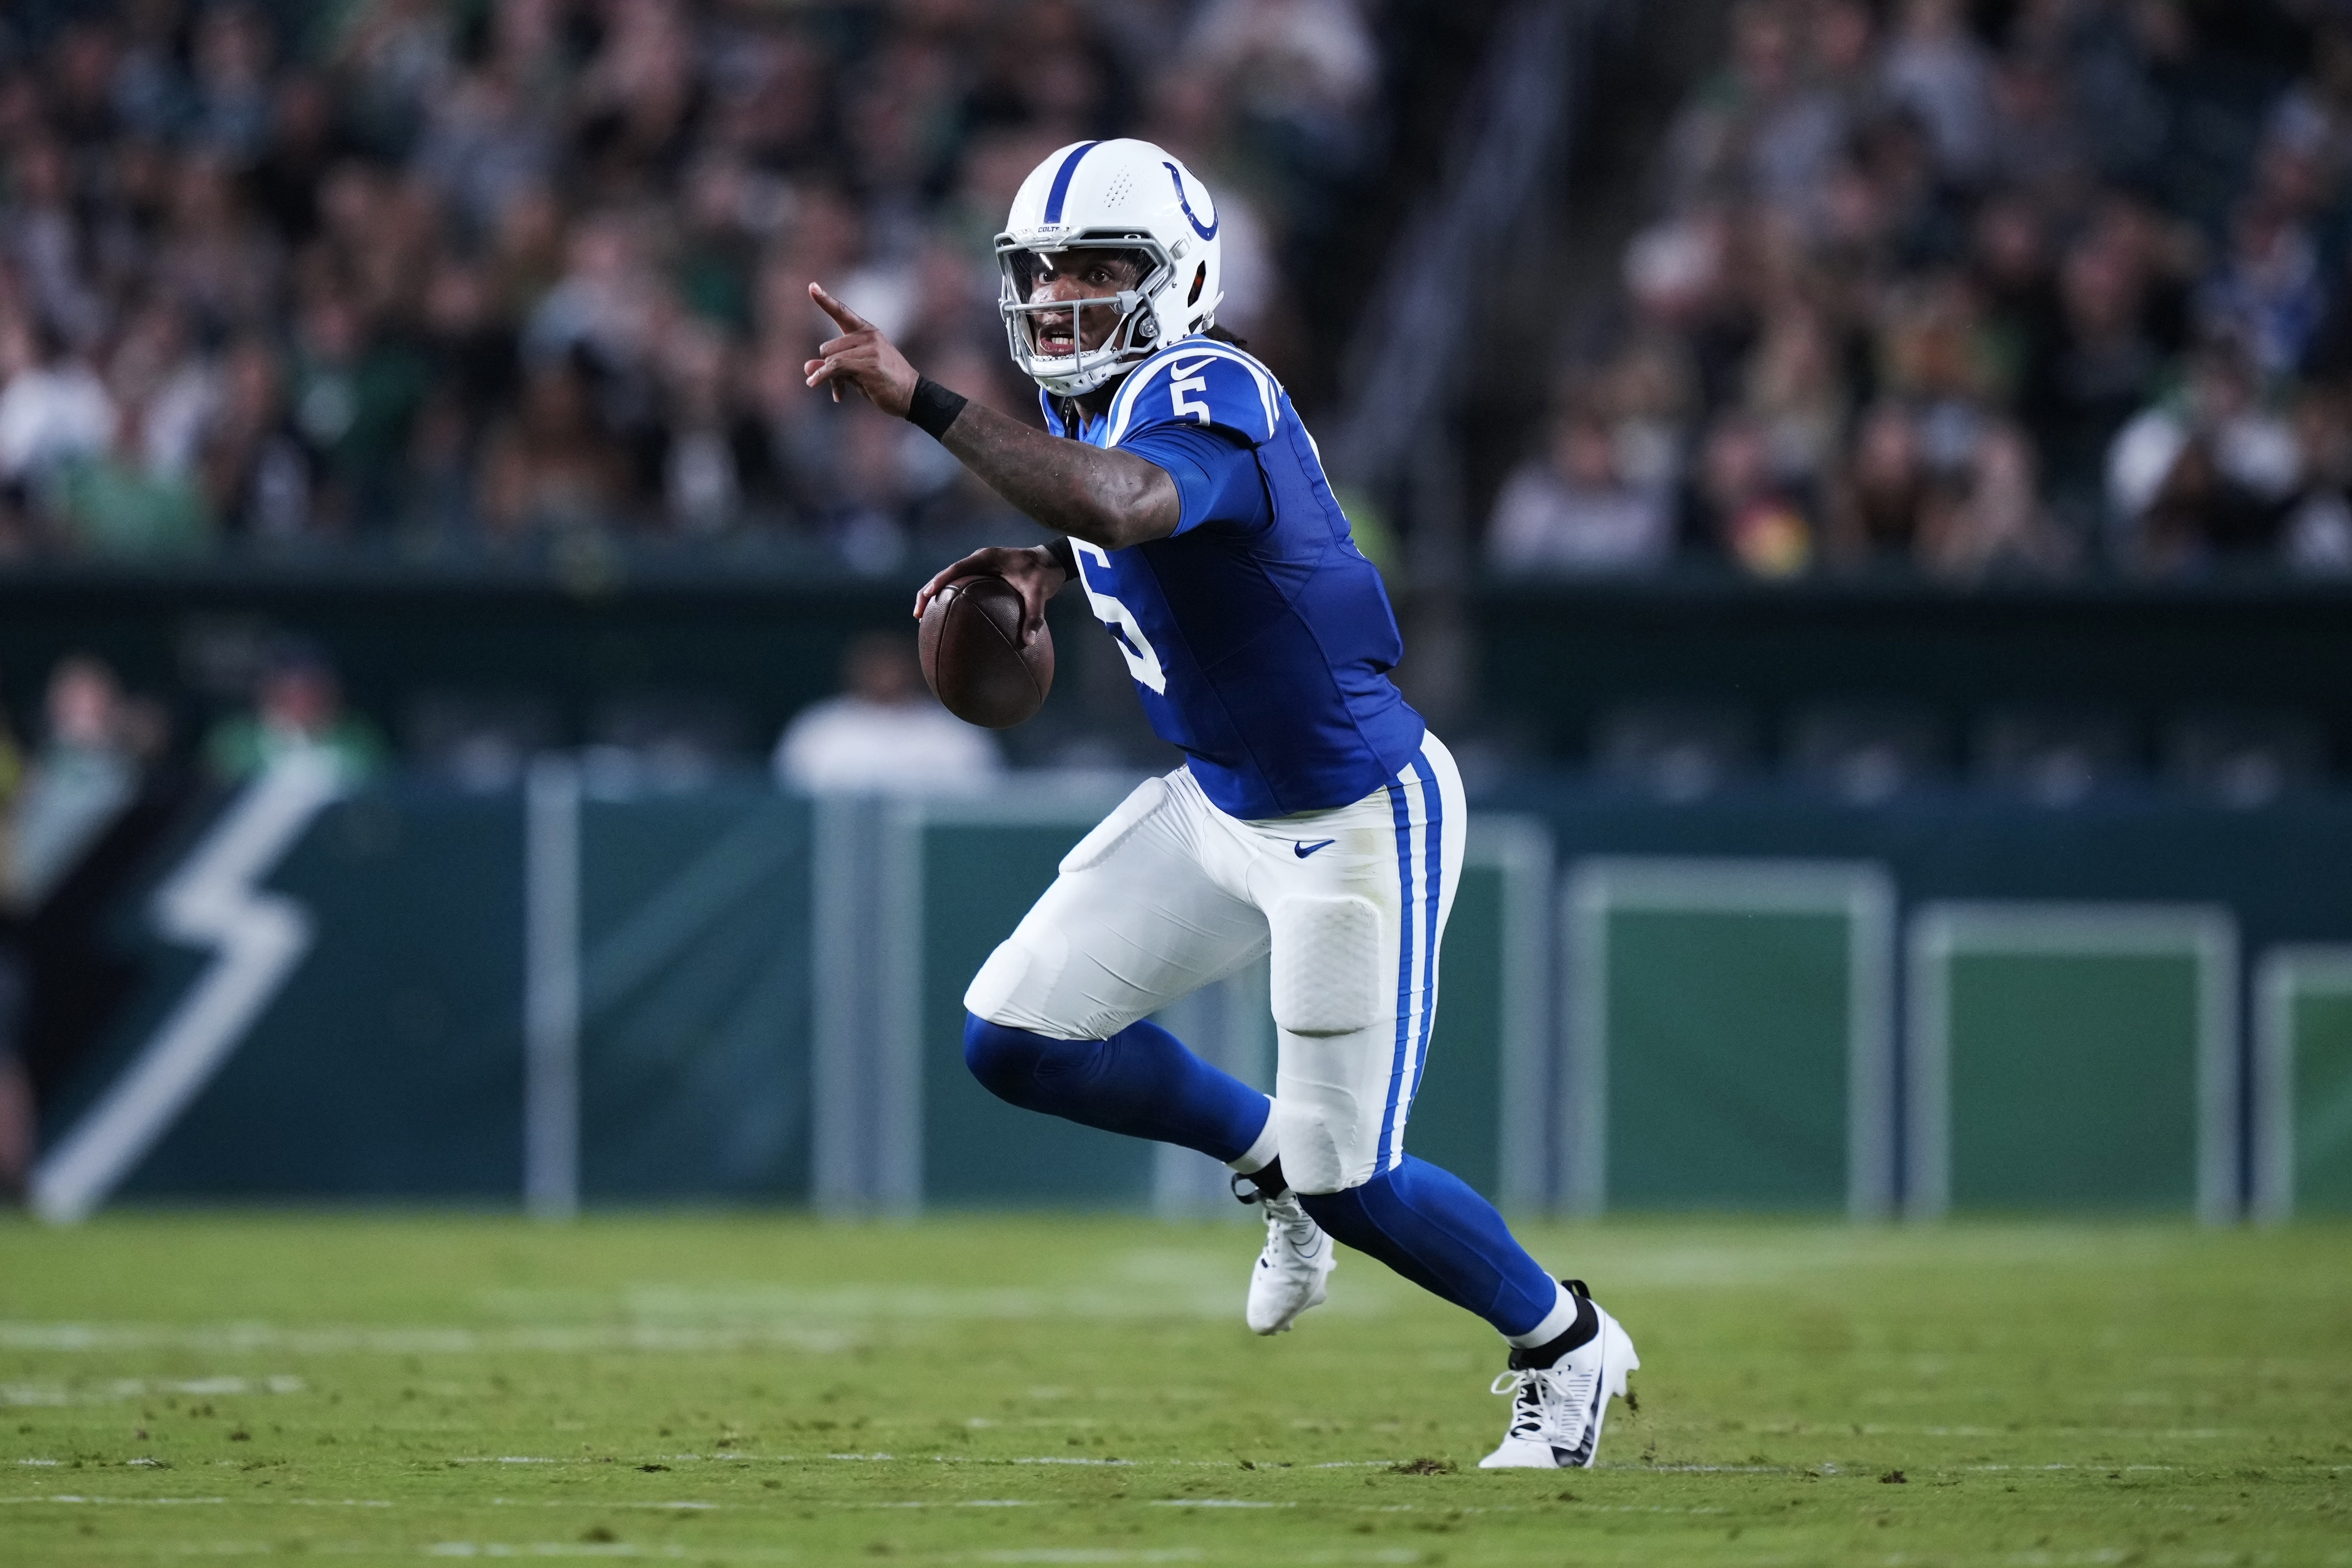 Colts rookie quarterback Anthony Richardson ruled out with